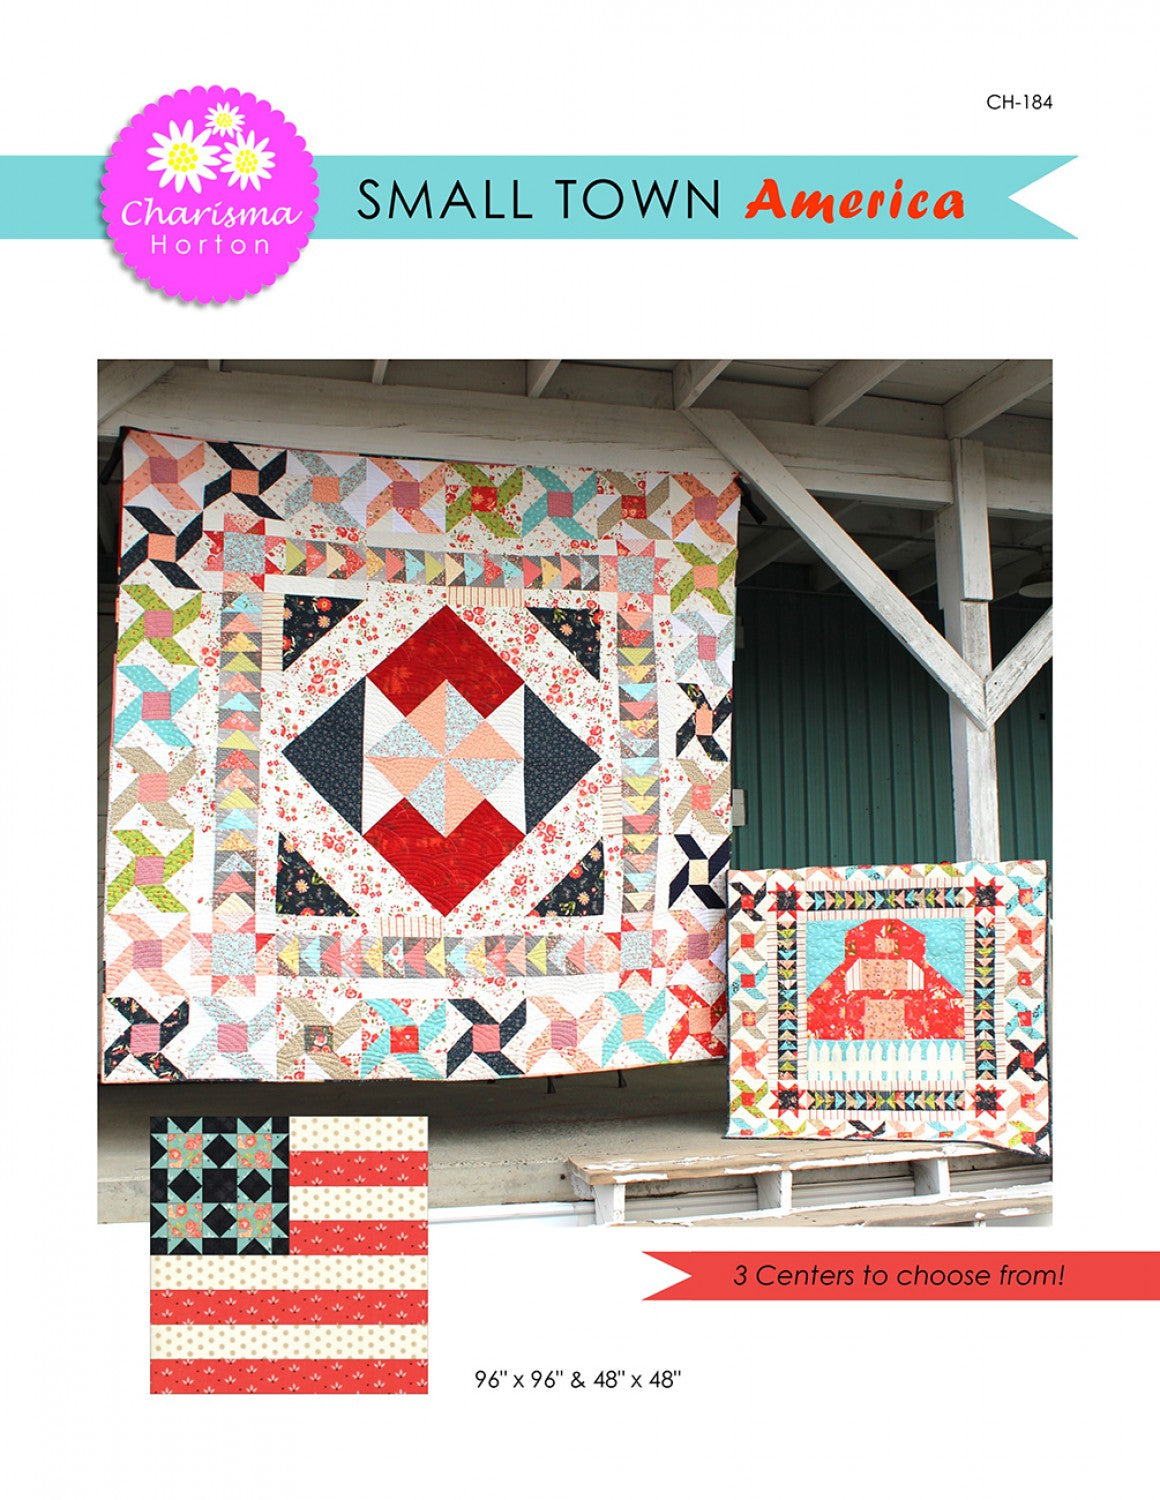 Small Town America / Charisma Horton Quilt Pattern